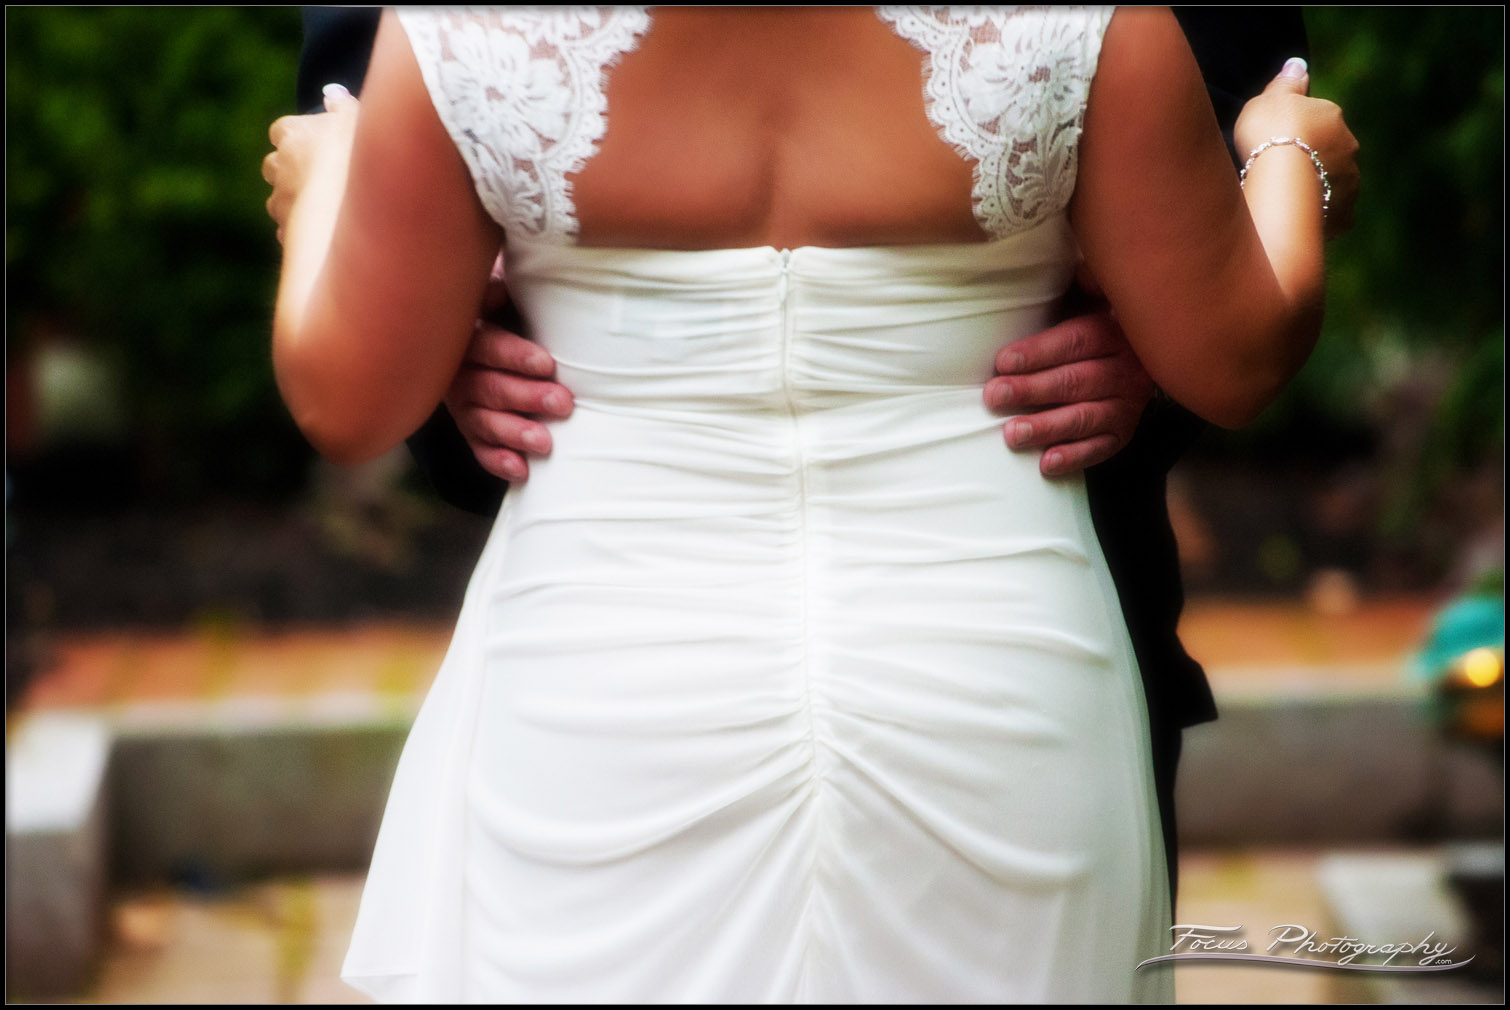 Back detail of wedding gown